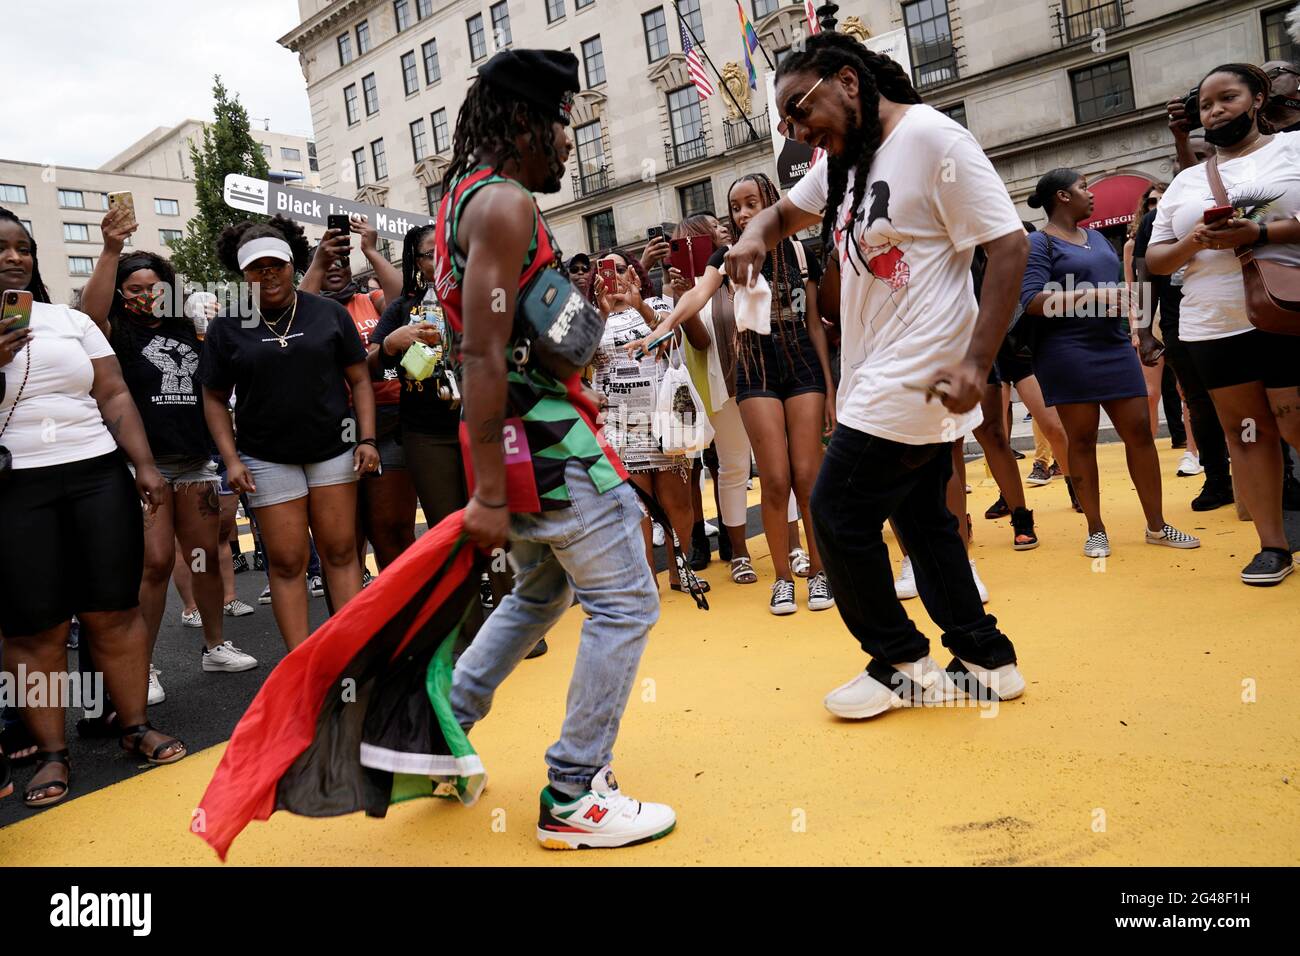 People celebrate Juneteenth, which commemorates the end of slavery in Texas, two years after the 1863 Emancipation Proclamation freed slaves elsewhere in the United States, at Black Lives Matter Plaza in Washington, D.C. U.S., June 19, 2021. REUTERS/Ken Cedeno Stock Photo